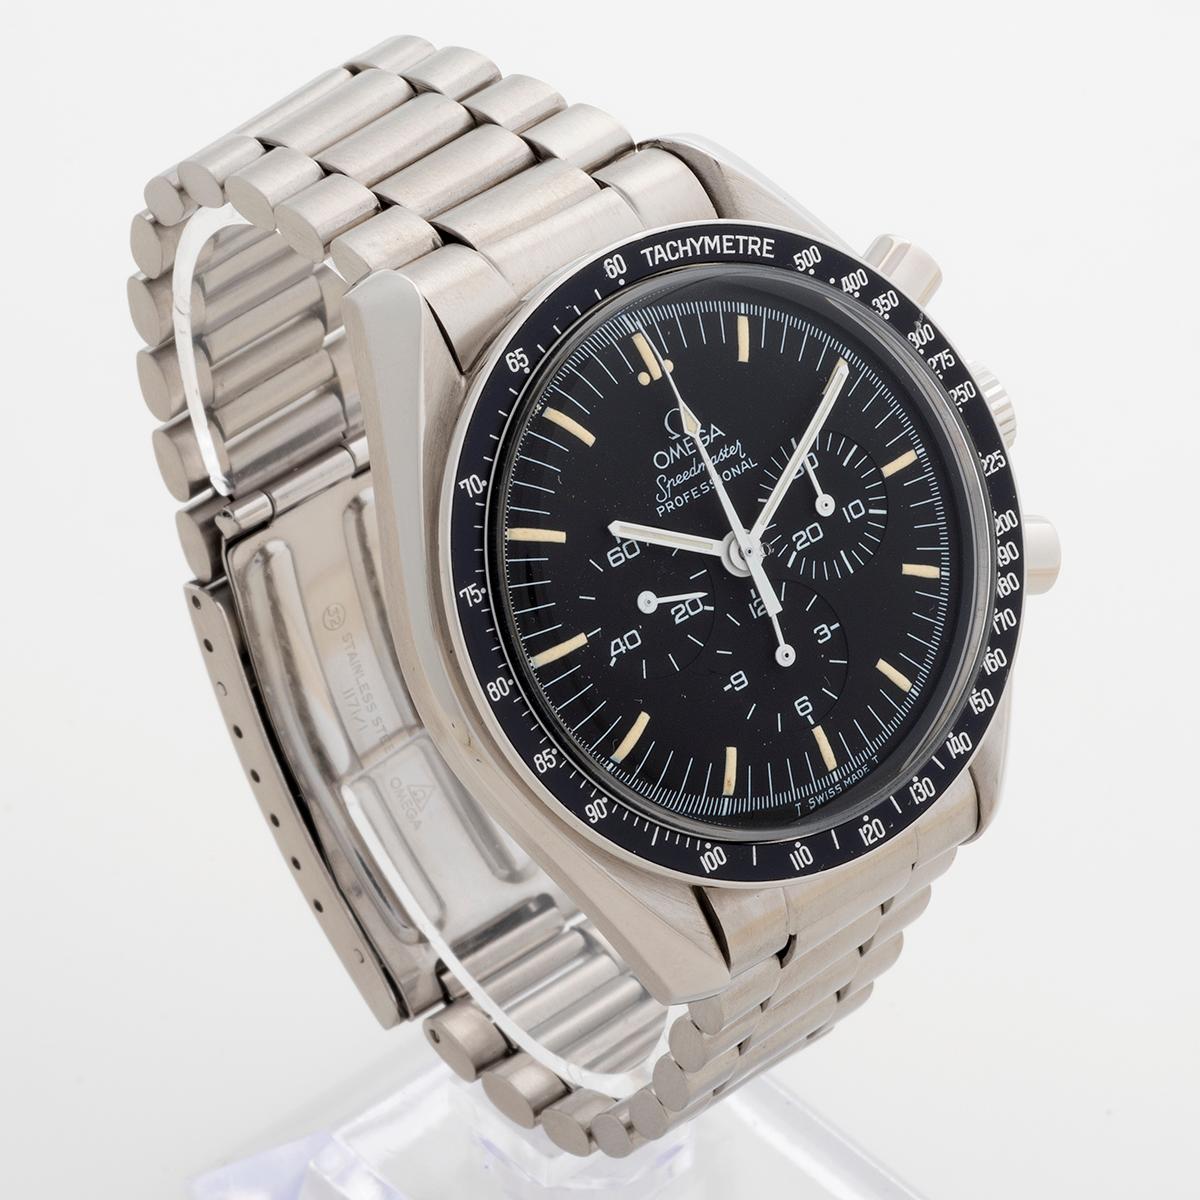 Our vintage Omega Speedmaster professional Moonwatch in stainless steel with stainless steel bracelet features a CRS (Spillman, Swiss) case, marked 145.022 C.R.S. on the caseback. A XXXXX serial watch, we date production to 1985. Presented in